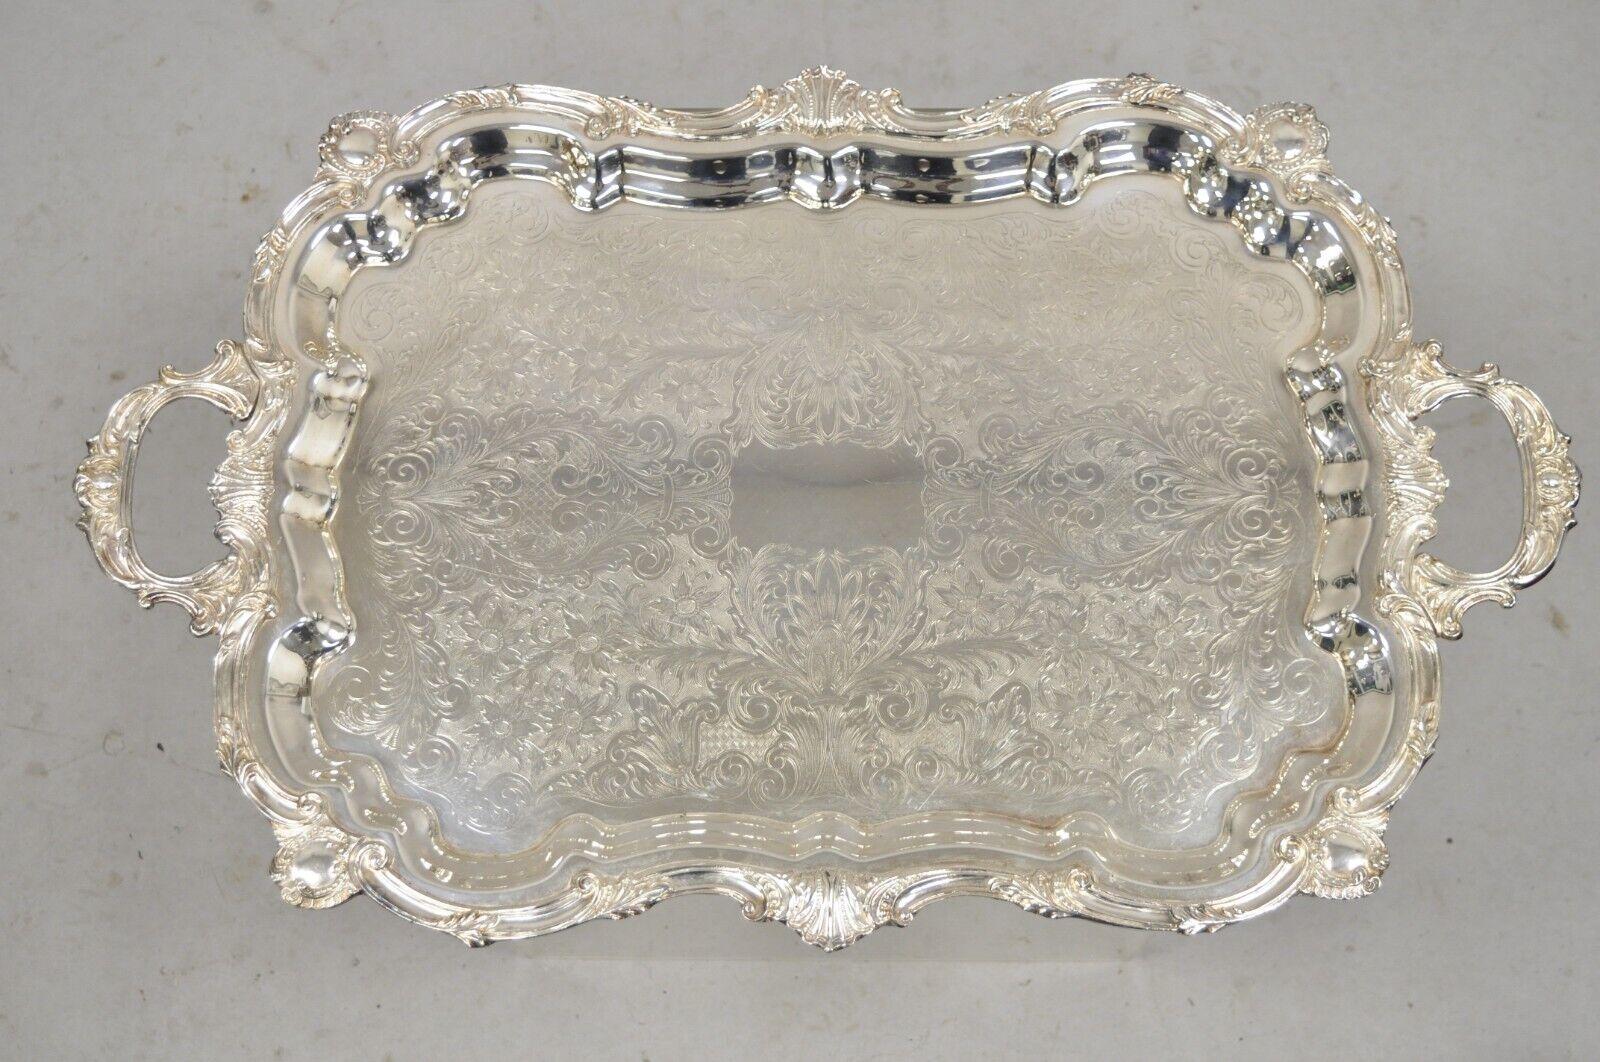 Vintage English Silver Mfg Corp Large Silver Plated Etched Platter Tray For Sale 5